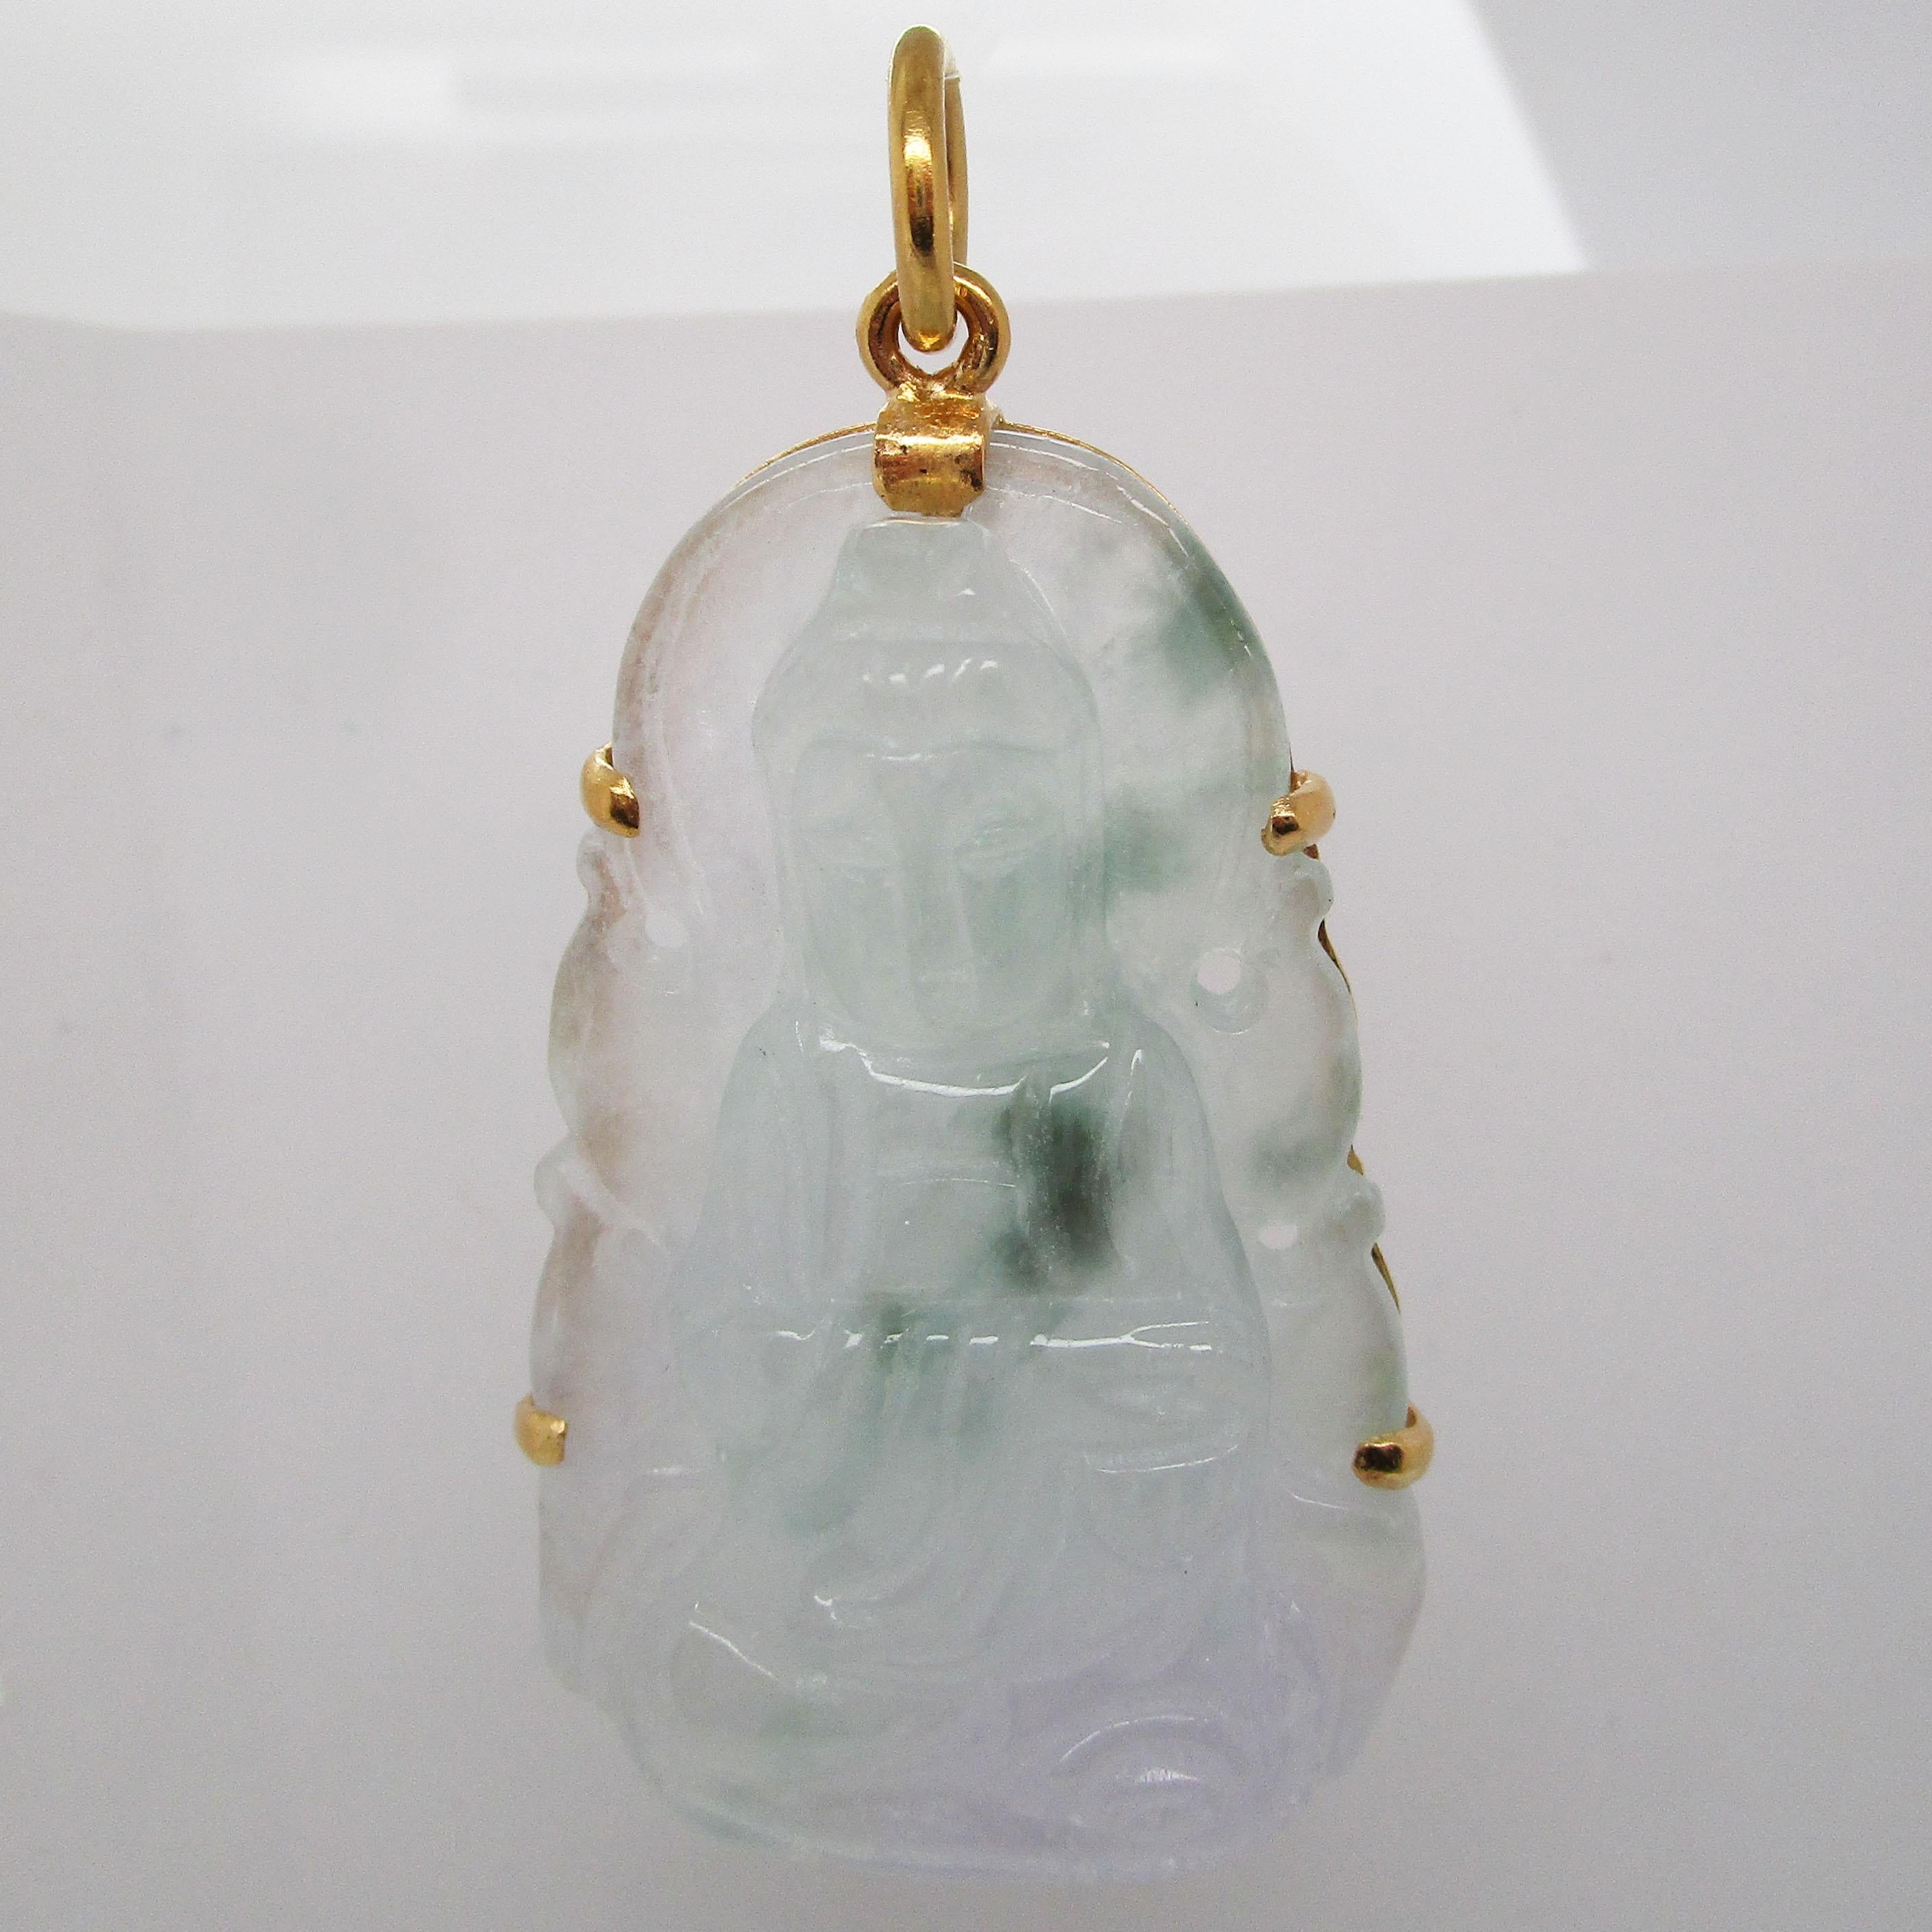 This is an absolutely gorgeous 22 karat yellow gold pendant that is an exceptional piece of carved jade. The carving depicts an elegant sitting Buddha. The carving is soft and detailed! This piece of jade is downright stunning. According to the GIA